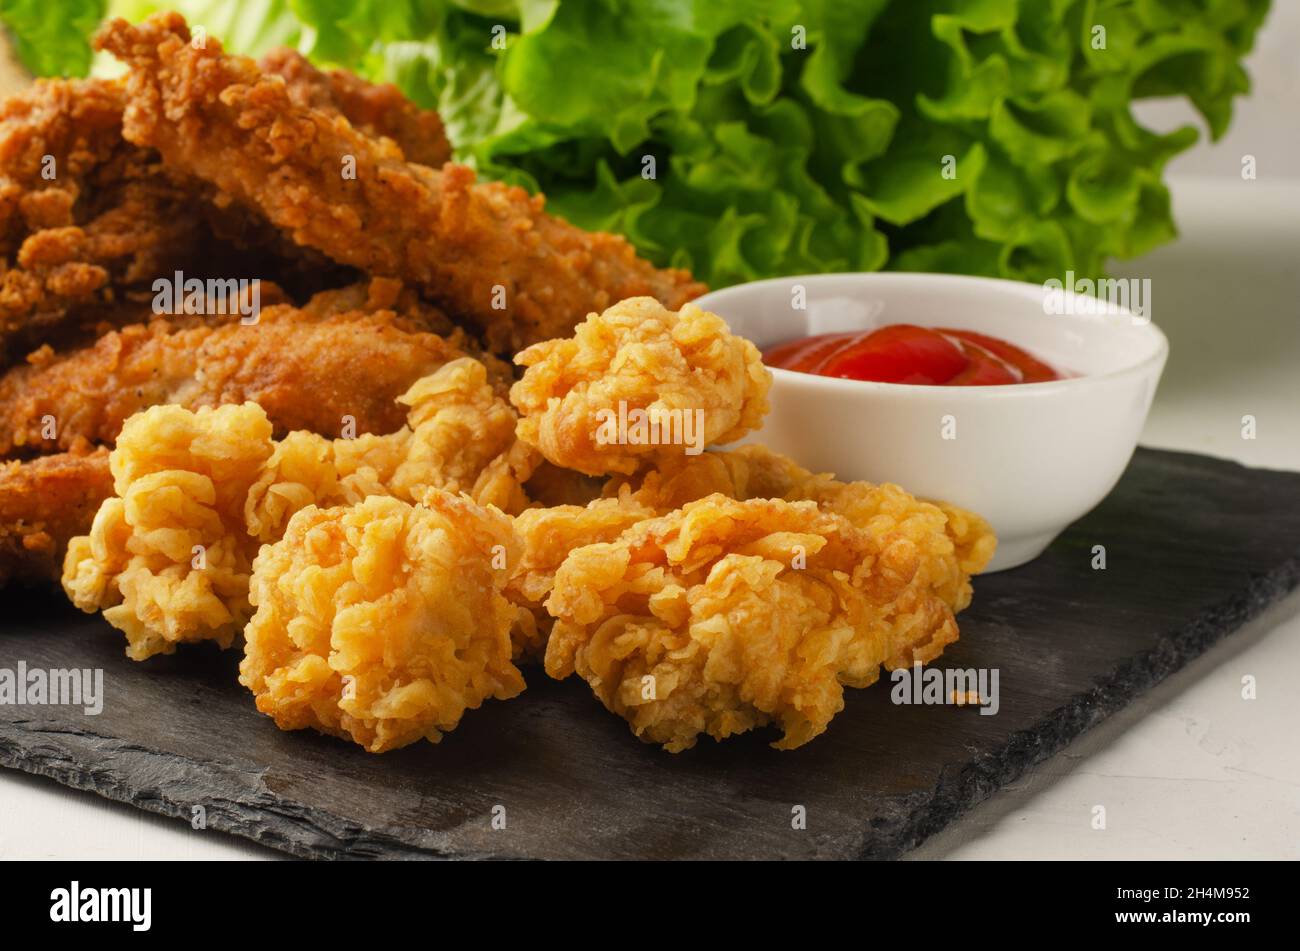 Fried chicken with french fries and nuggets. With ketchup. Stock Photo